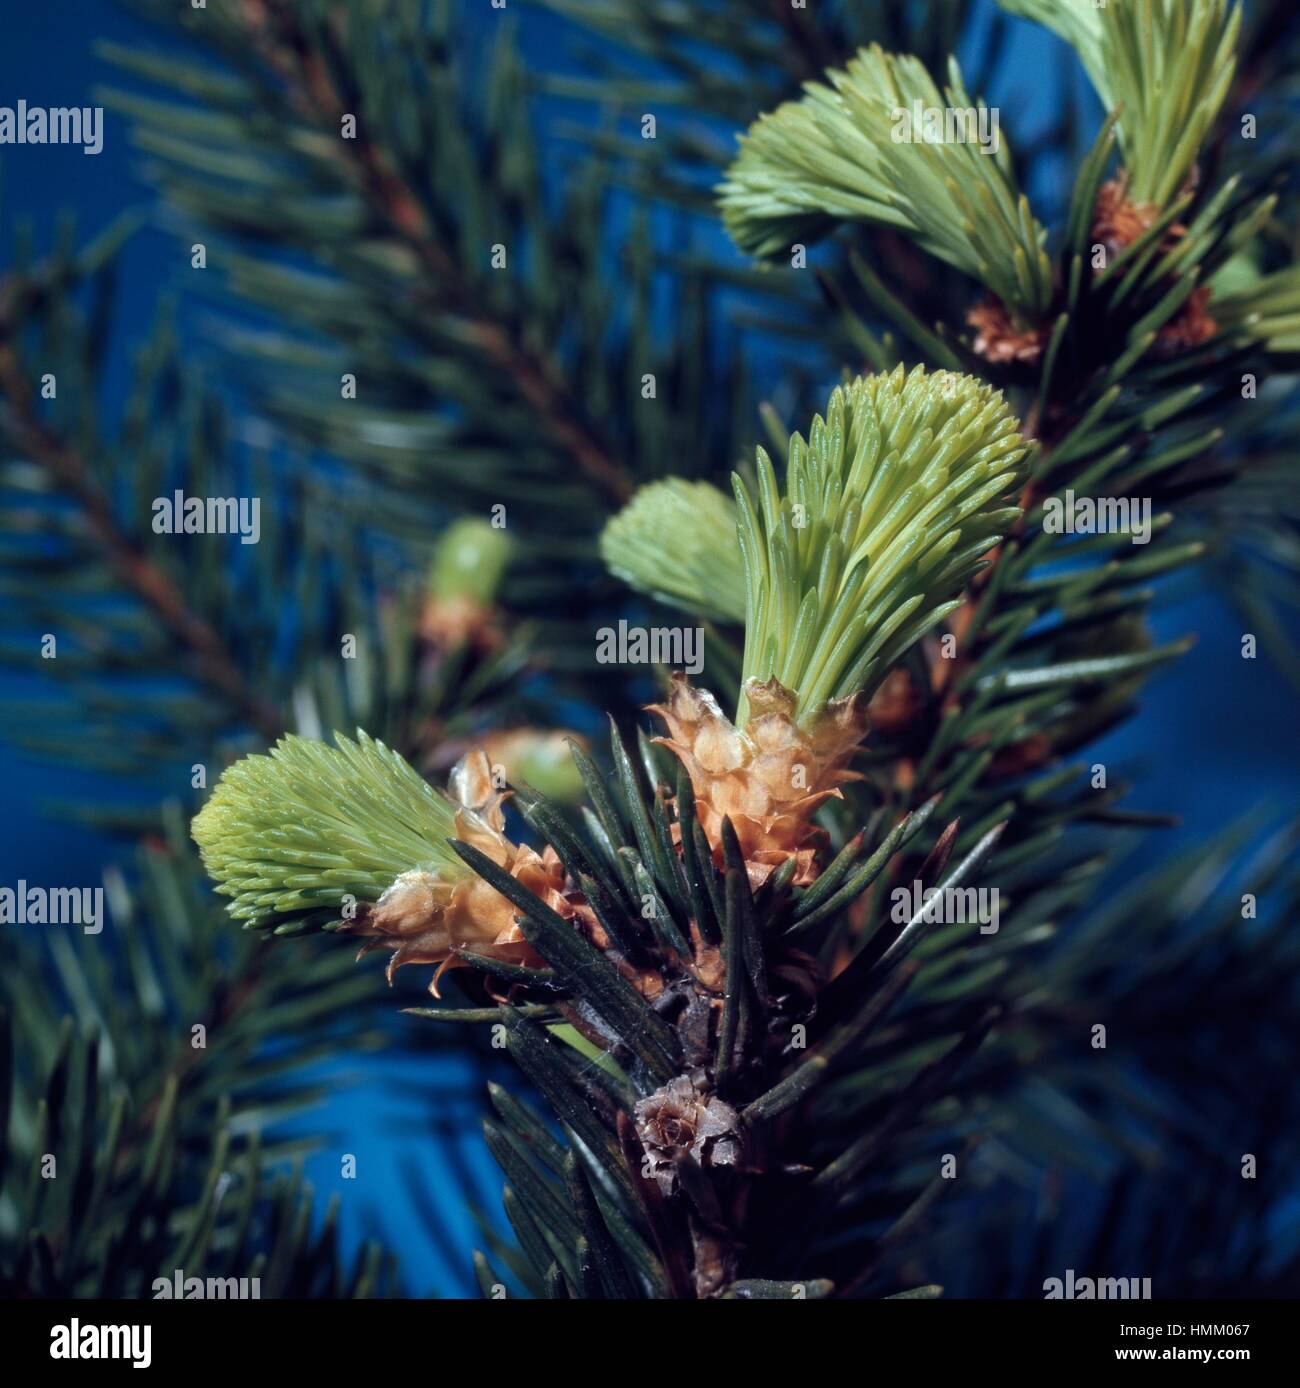 Norway Spruce leaf buds (Picea abies), Pinaceae. Stock Photo